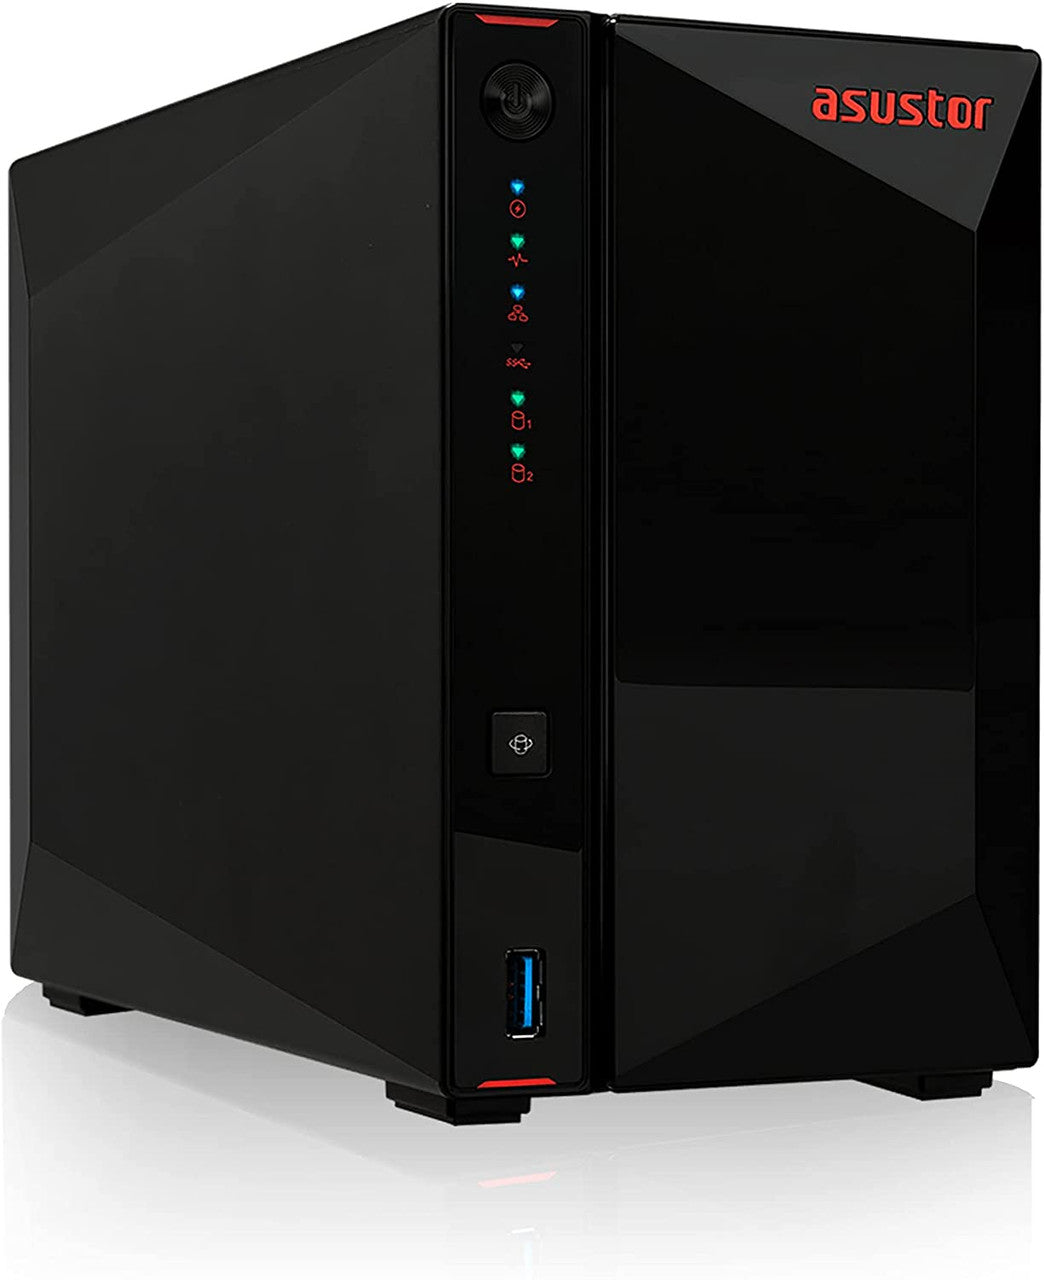 Asustor AS5202T 2-Bay Nimbustor 2 NAS with 8GB RAM and 8TB (2 x 4TB) Seagate Ironwolf NAS Drives Fully Assembled and Tested